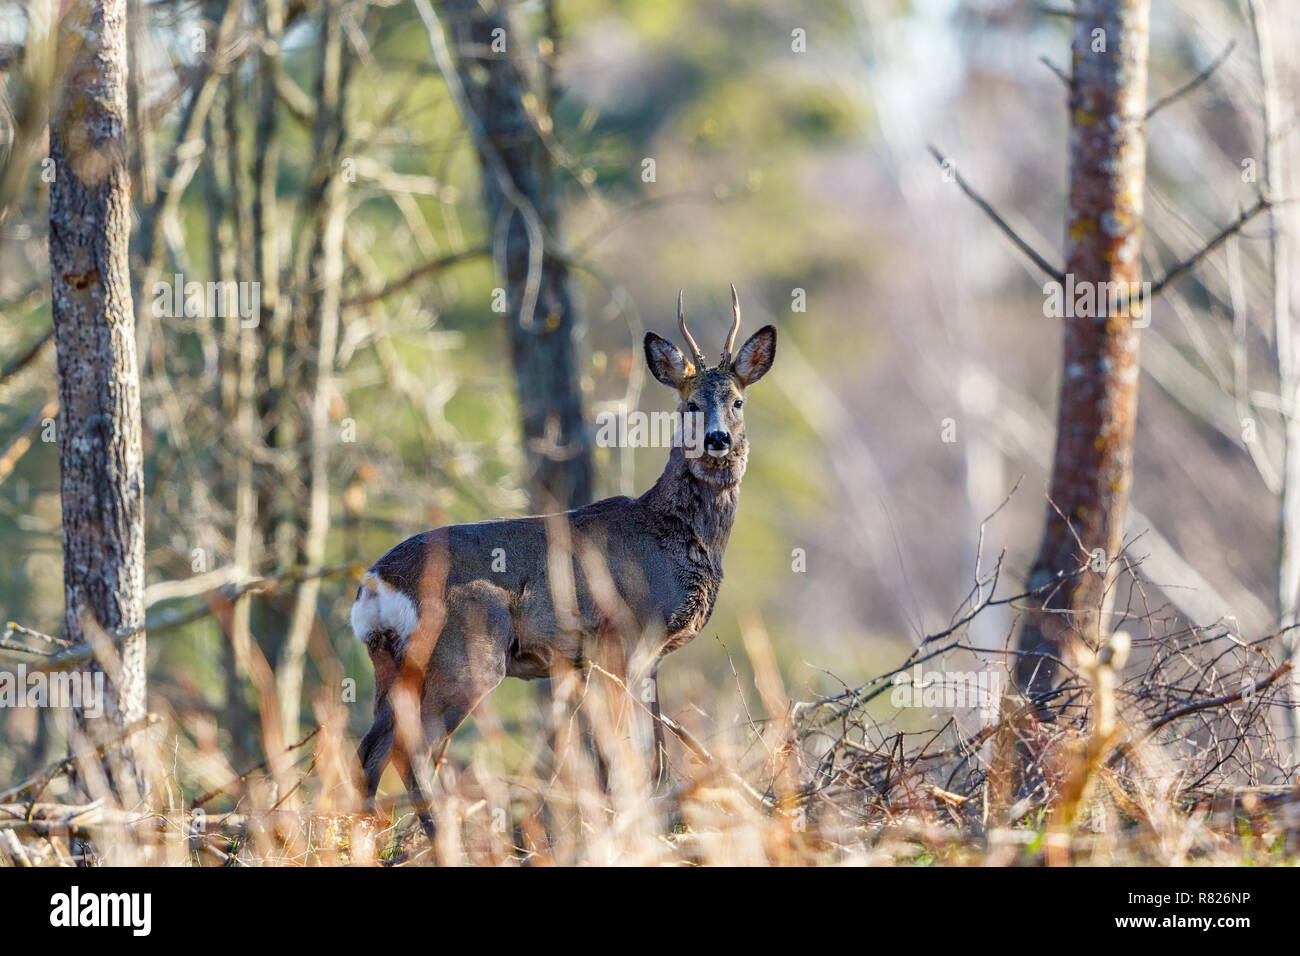 Roe deer standing and watching in the forest Stock Photo